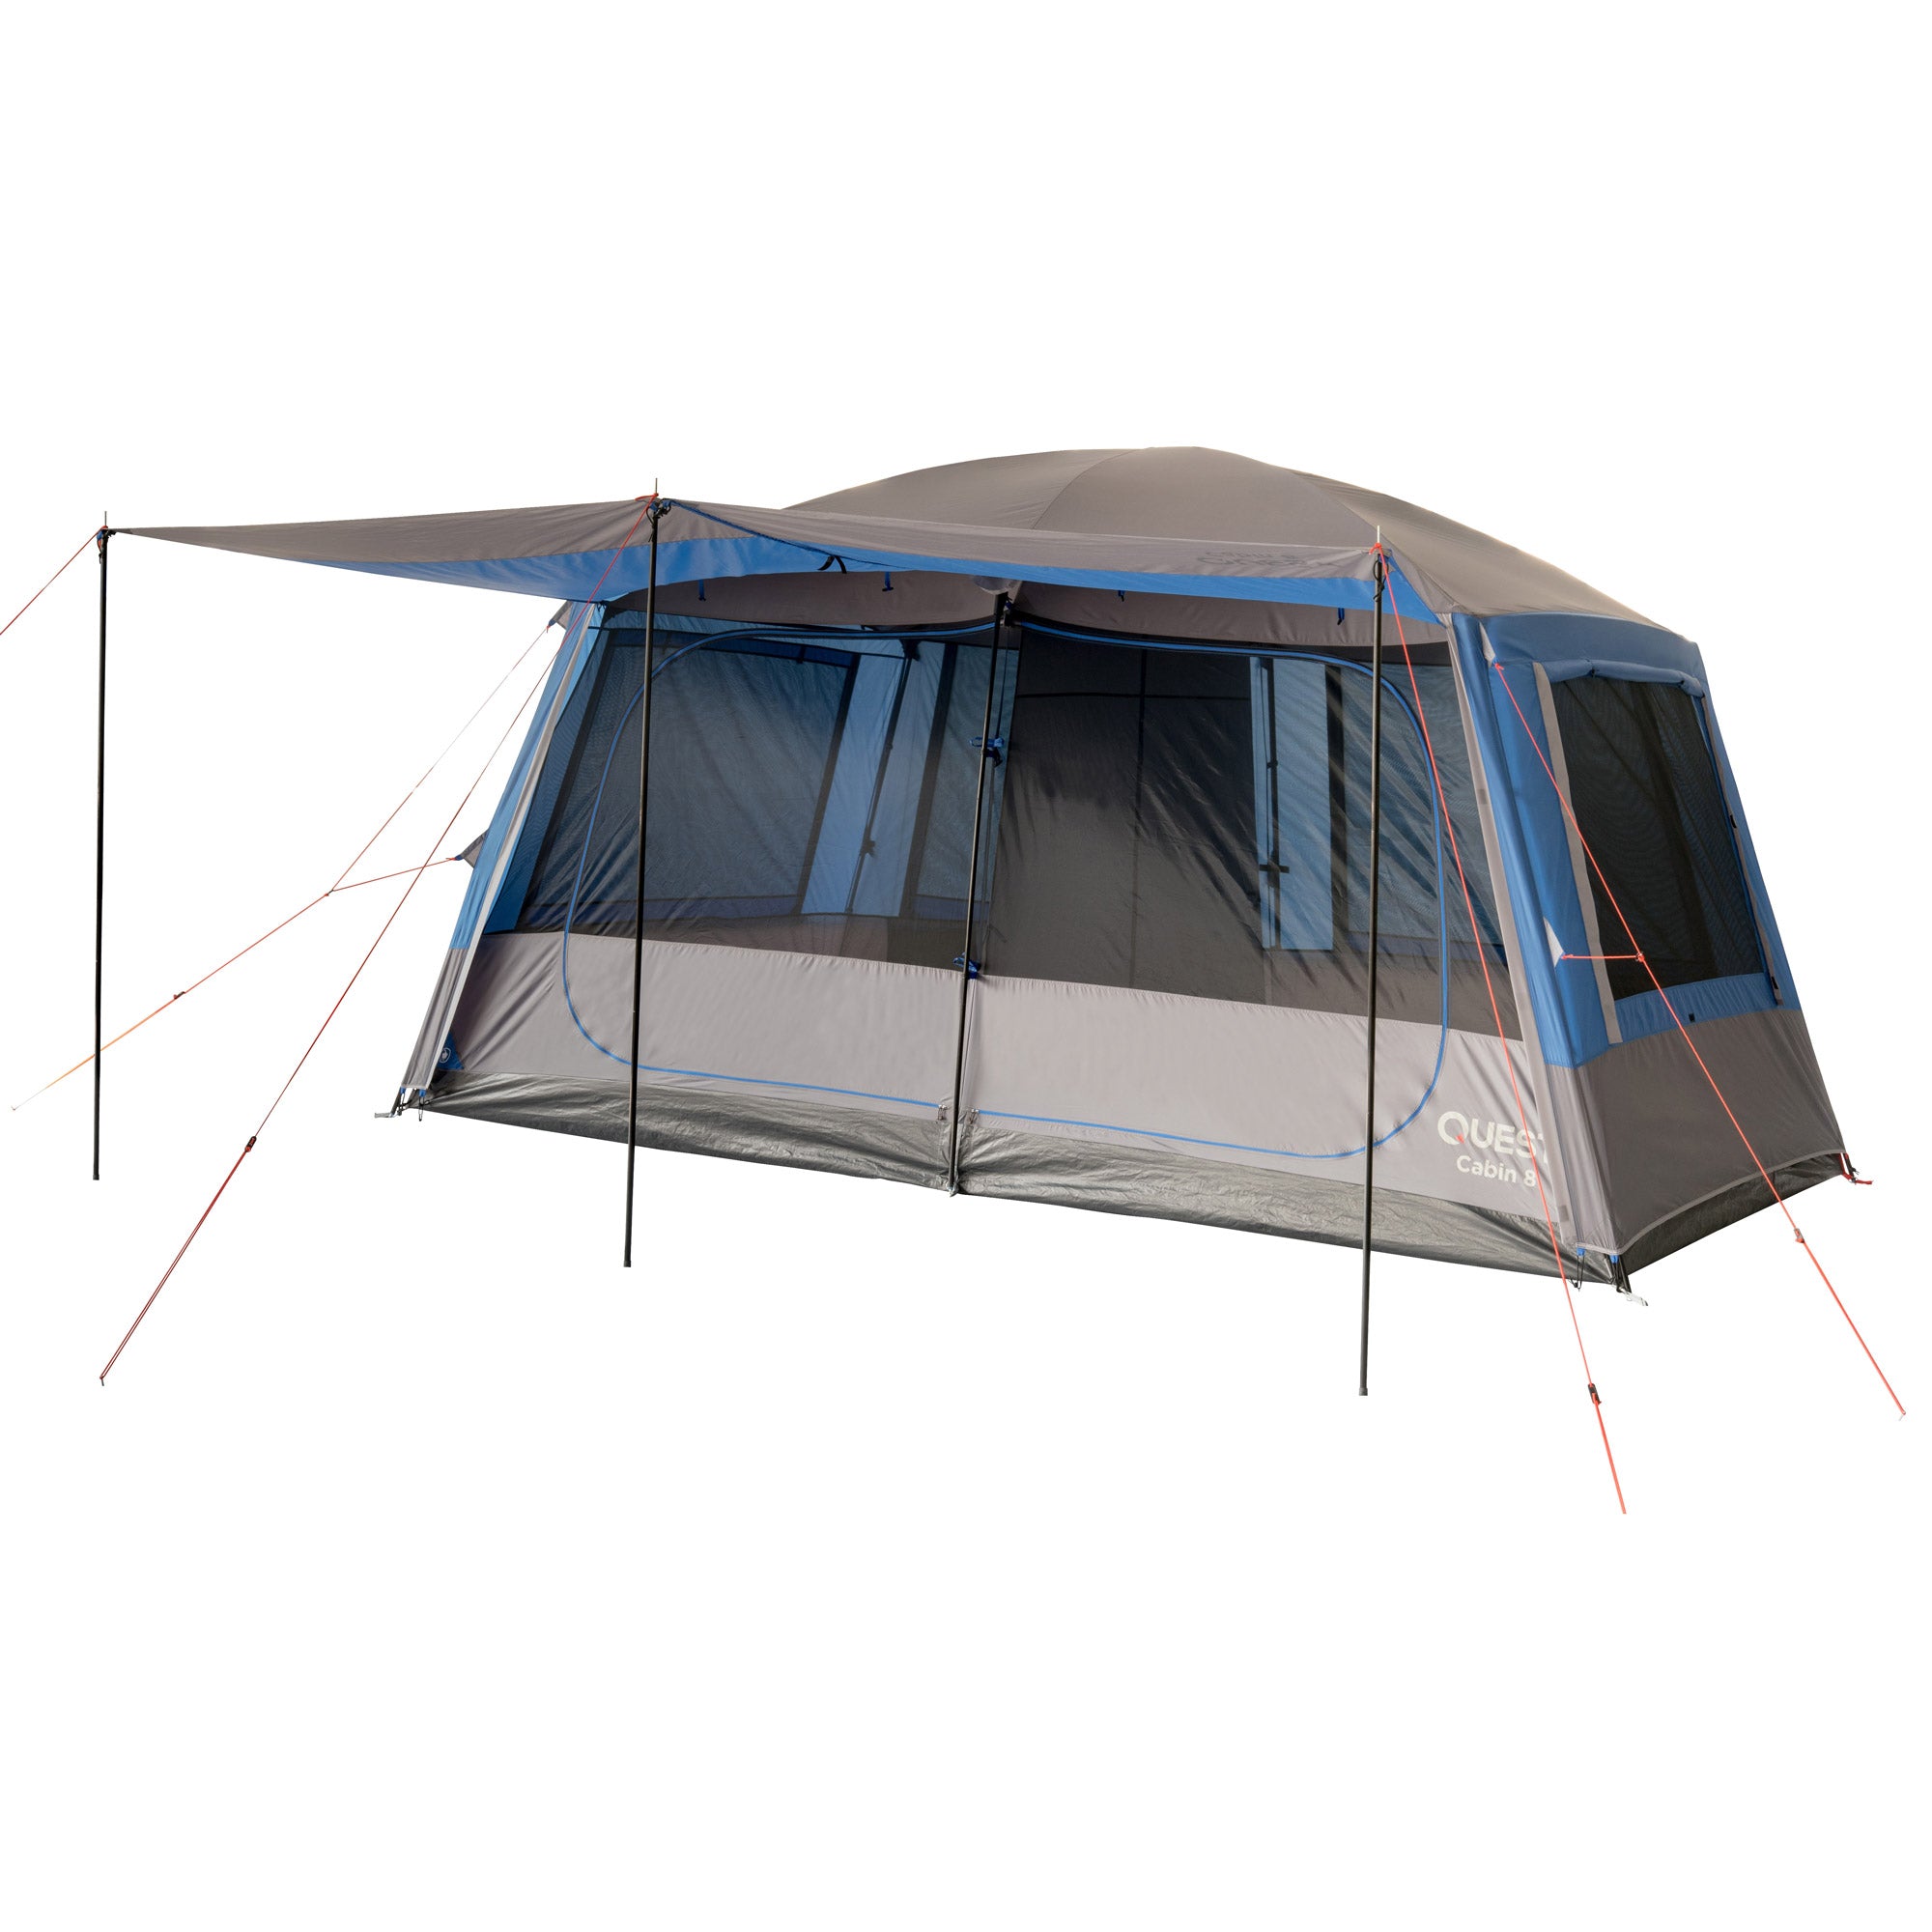 Quest Straight Wall 2 Room Cabin Tent - 8 Person